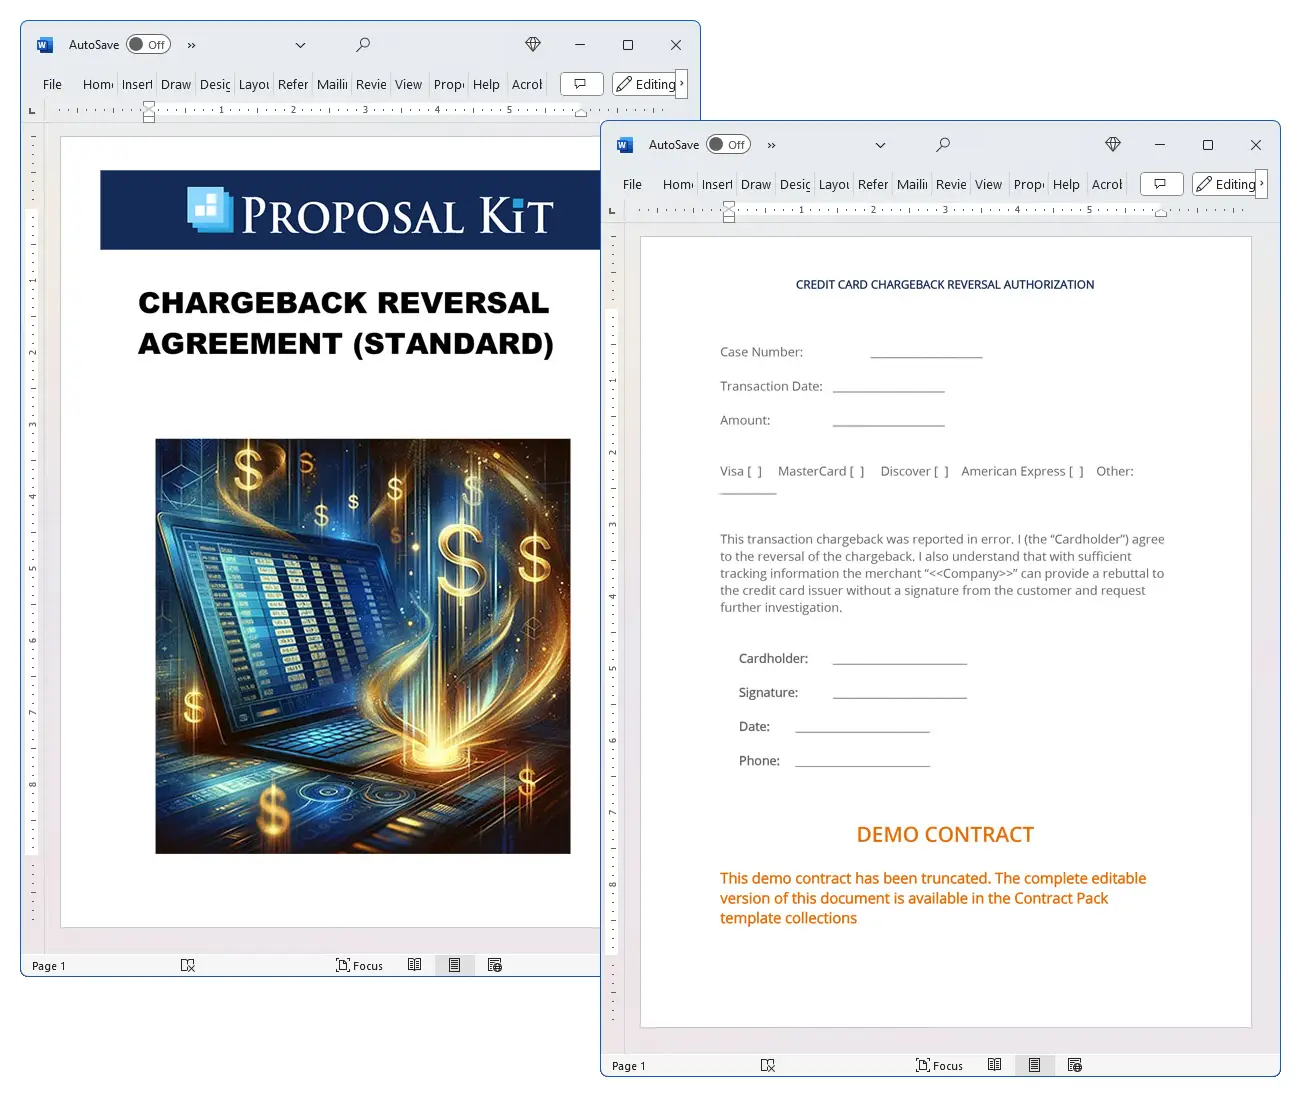 Chargeback Reversal Agreement (Standard) Concepts